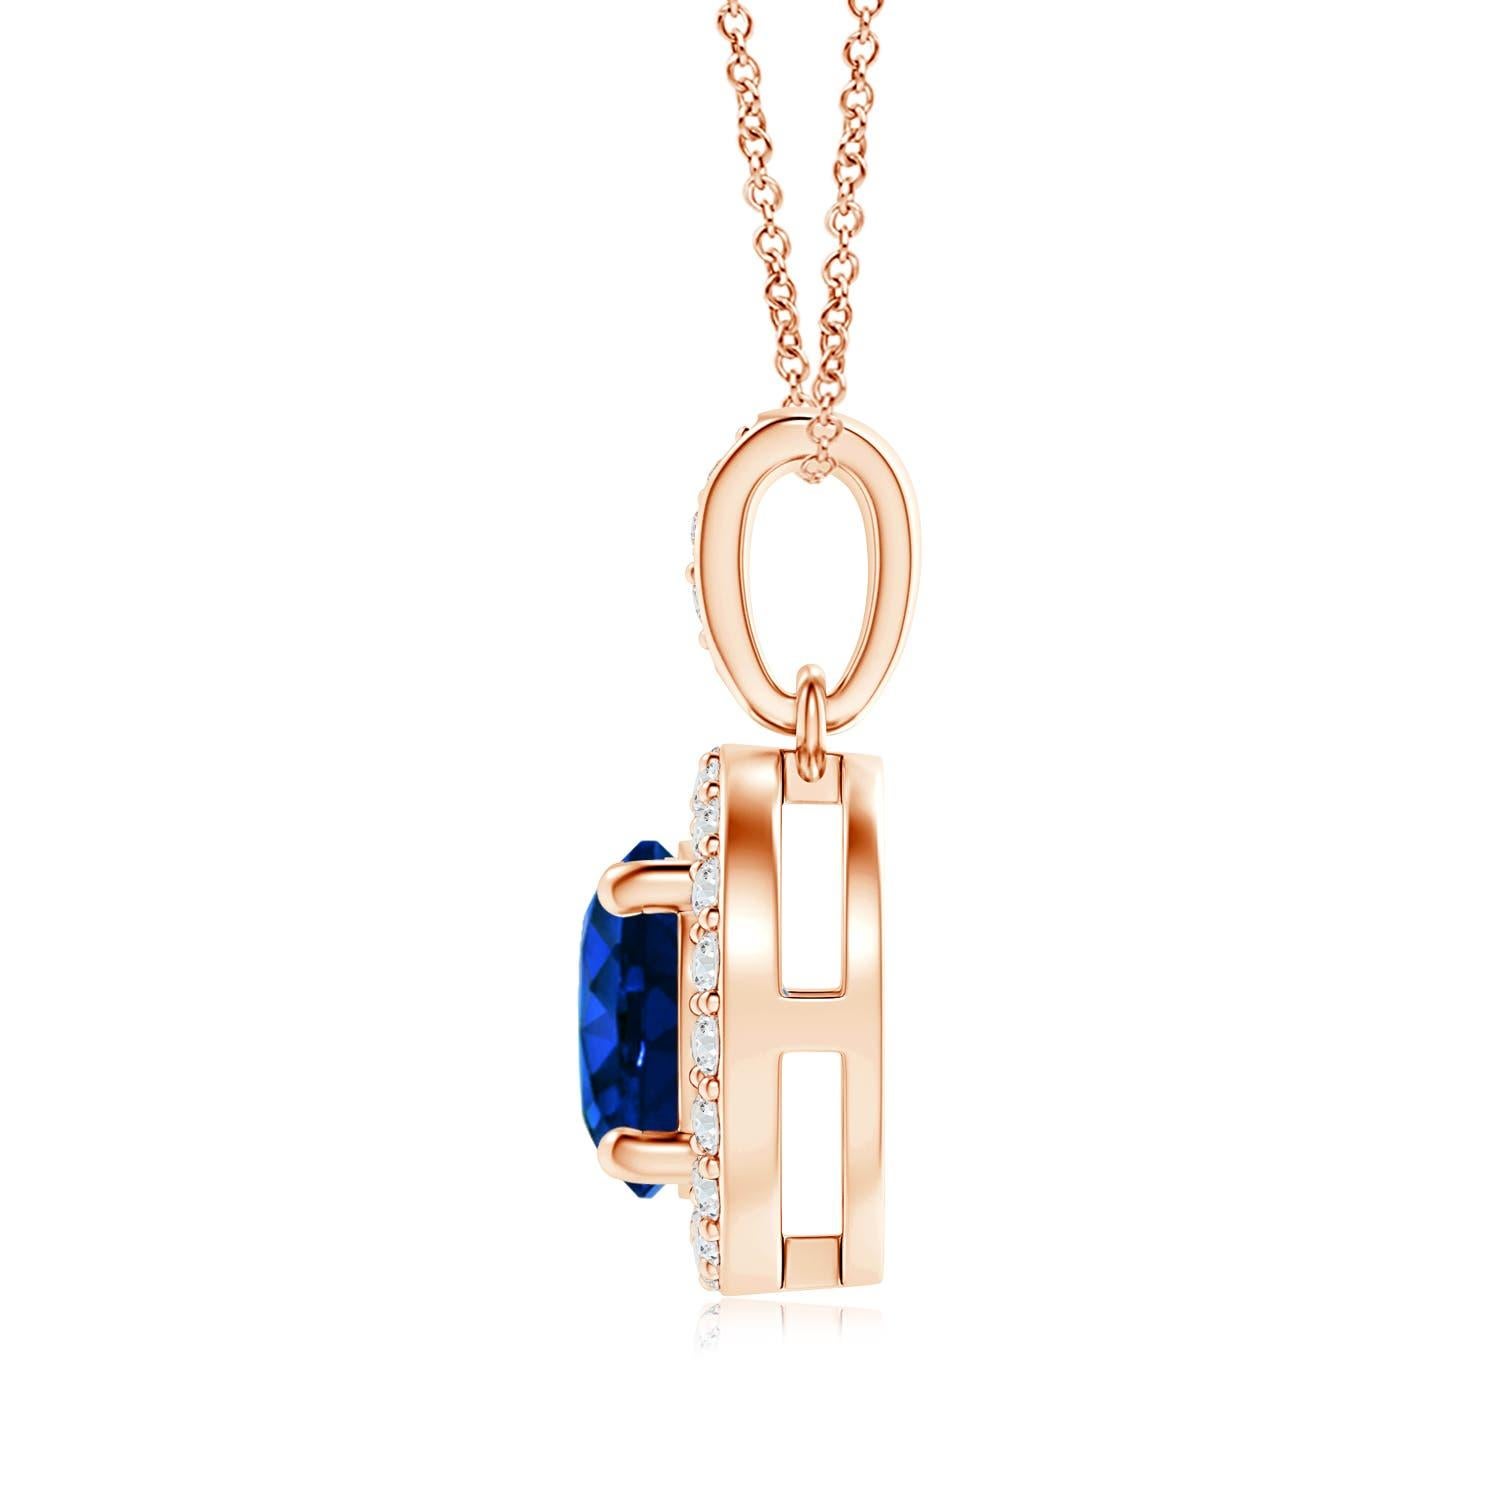 The GIA certified round blue sapphire is held in a prong setting and appears to be floating amid a dazzling diamond halo. There are additional diamond accents on the bale that elevate the elegant look of this 18K Rose Gold pendant.
